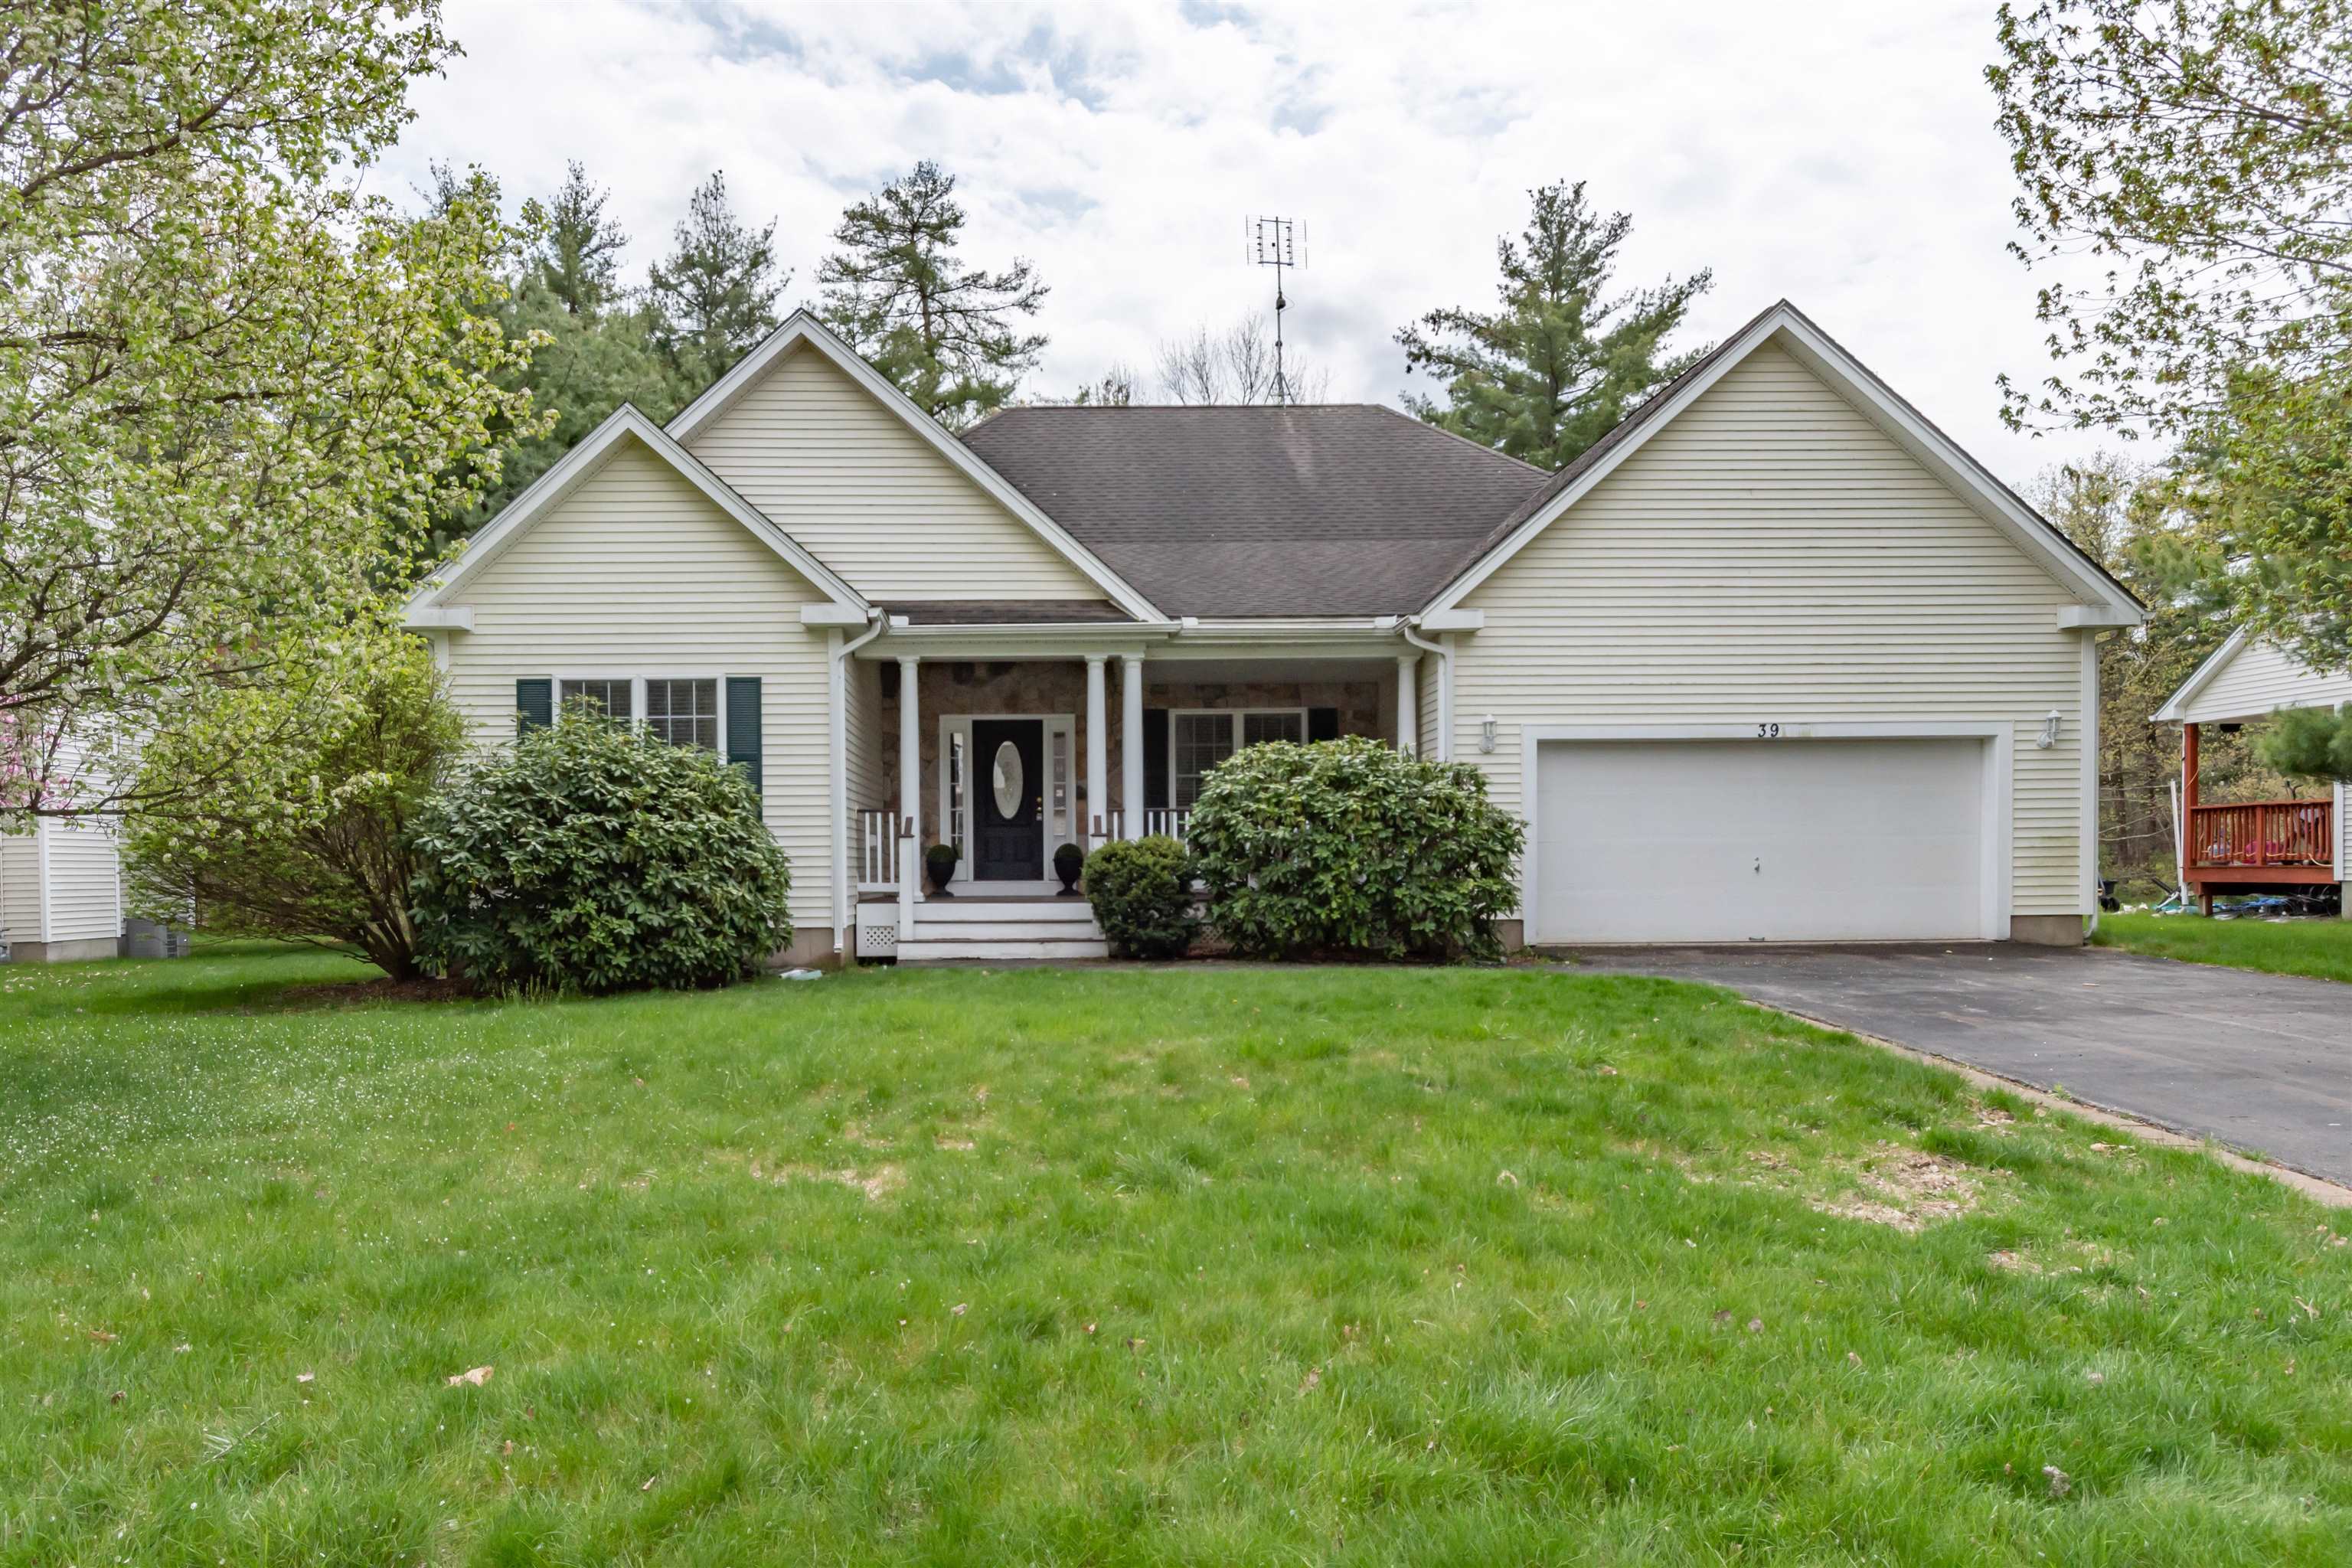 OPEN HOUSE SATURDAY 11:00 - 1:00 Looking for the perfect home, this may be the one! Come take a look at this South Nashua Ranch, You will be happy you did which is located in the sought-after Maplewood Neighborhood. From the moment you walk onto the covered mahogany front porch and into the foyer, you will appreciate the attention to detail and airiness the home provides. The spacious dining room is off the foyer with custom columns anddecorative moldings. You’ll enjoy The gleaming hardwood floors throughout the living areas are special. large windows provide lots of light to spending time in the sundrenched livingand dining rooms, perfect for families or entertaining with a convenient gas fireplace. The main floor has a The remaining upstairs consists of a primary bedroom with a walk-in closet and aerated tub.  The other 2 bedrooms and 1 bath are separated by a pocket door for privacy. The lower level features a huge game/family room and office with a built-in desk. Youstill have 1,000 sq. ft. of unfinished basement and workshop with endless possibilities. The home has a large deck overlooking a private backyard with access to the local walking/biking trail system.